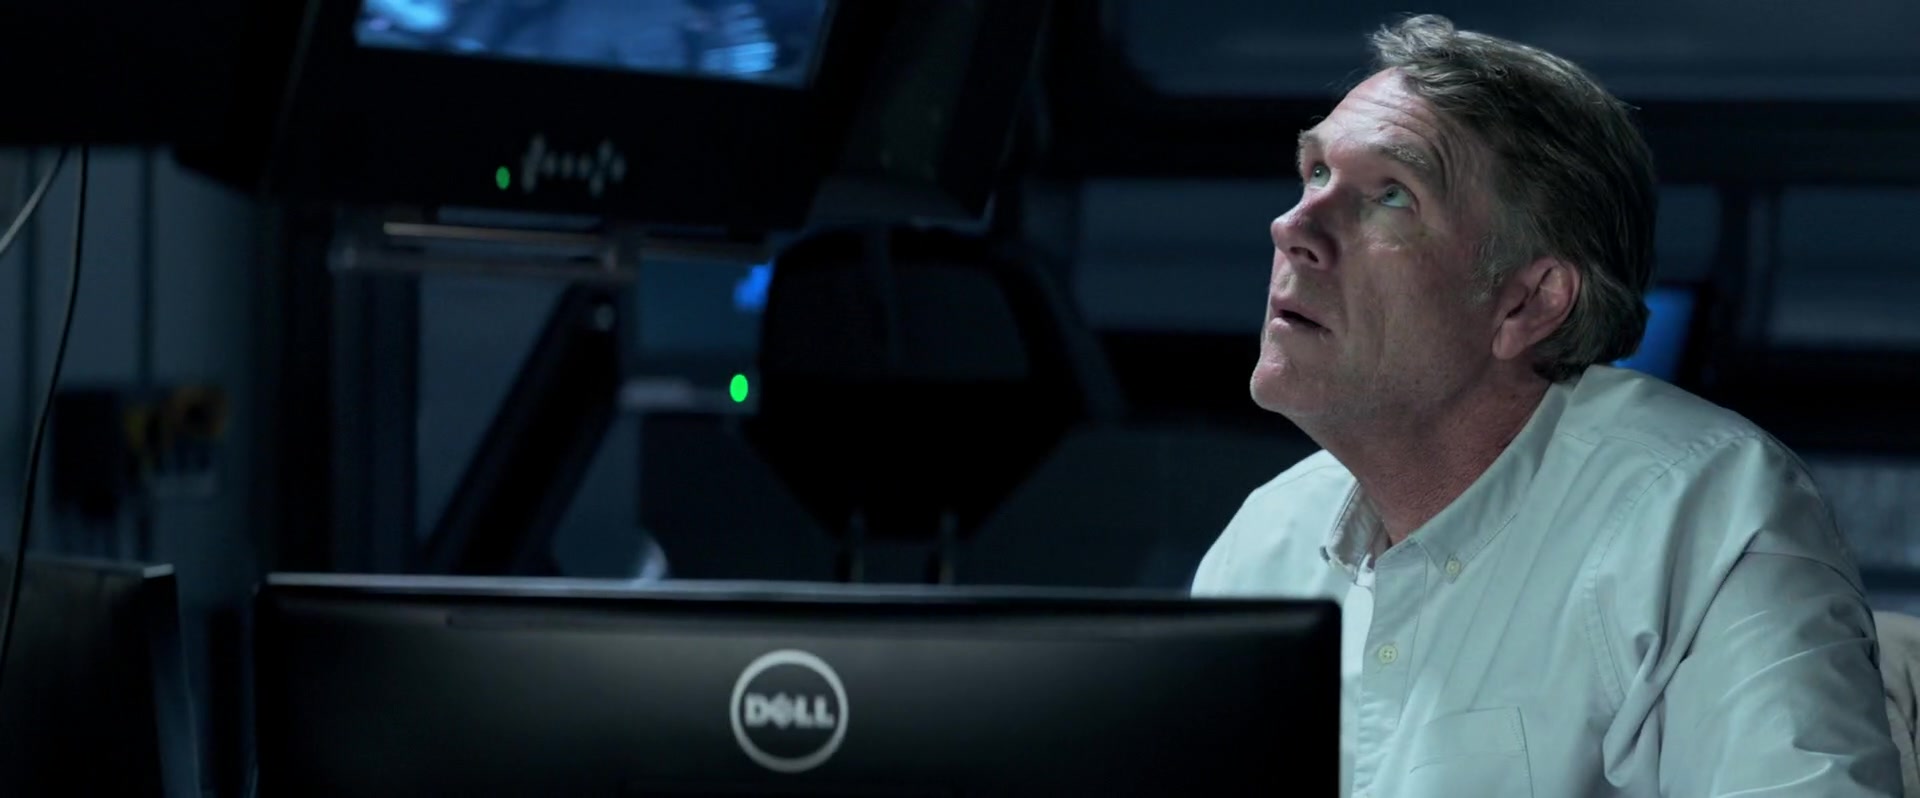 Dell Computer Used by Robert Taylor in The Meg (2018) Movie